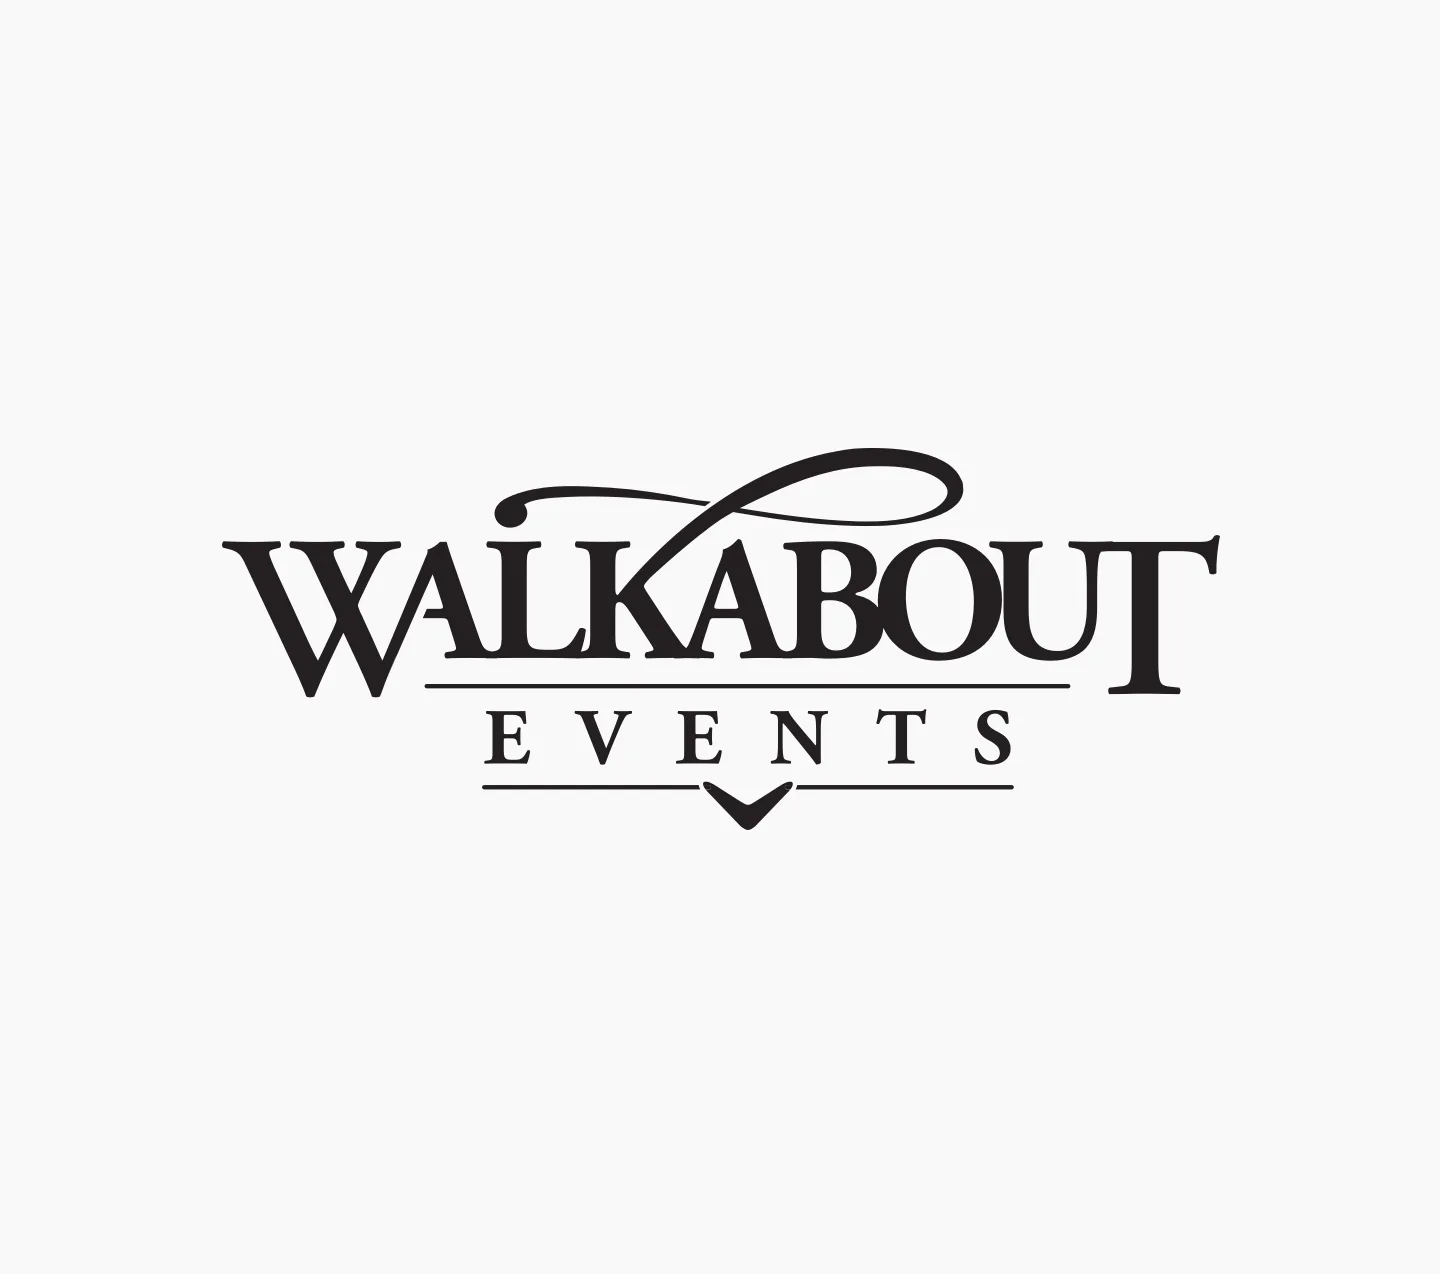 Walkabout events logo